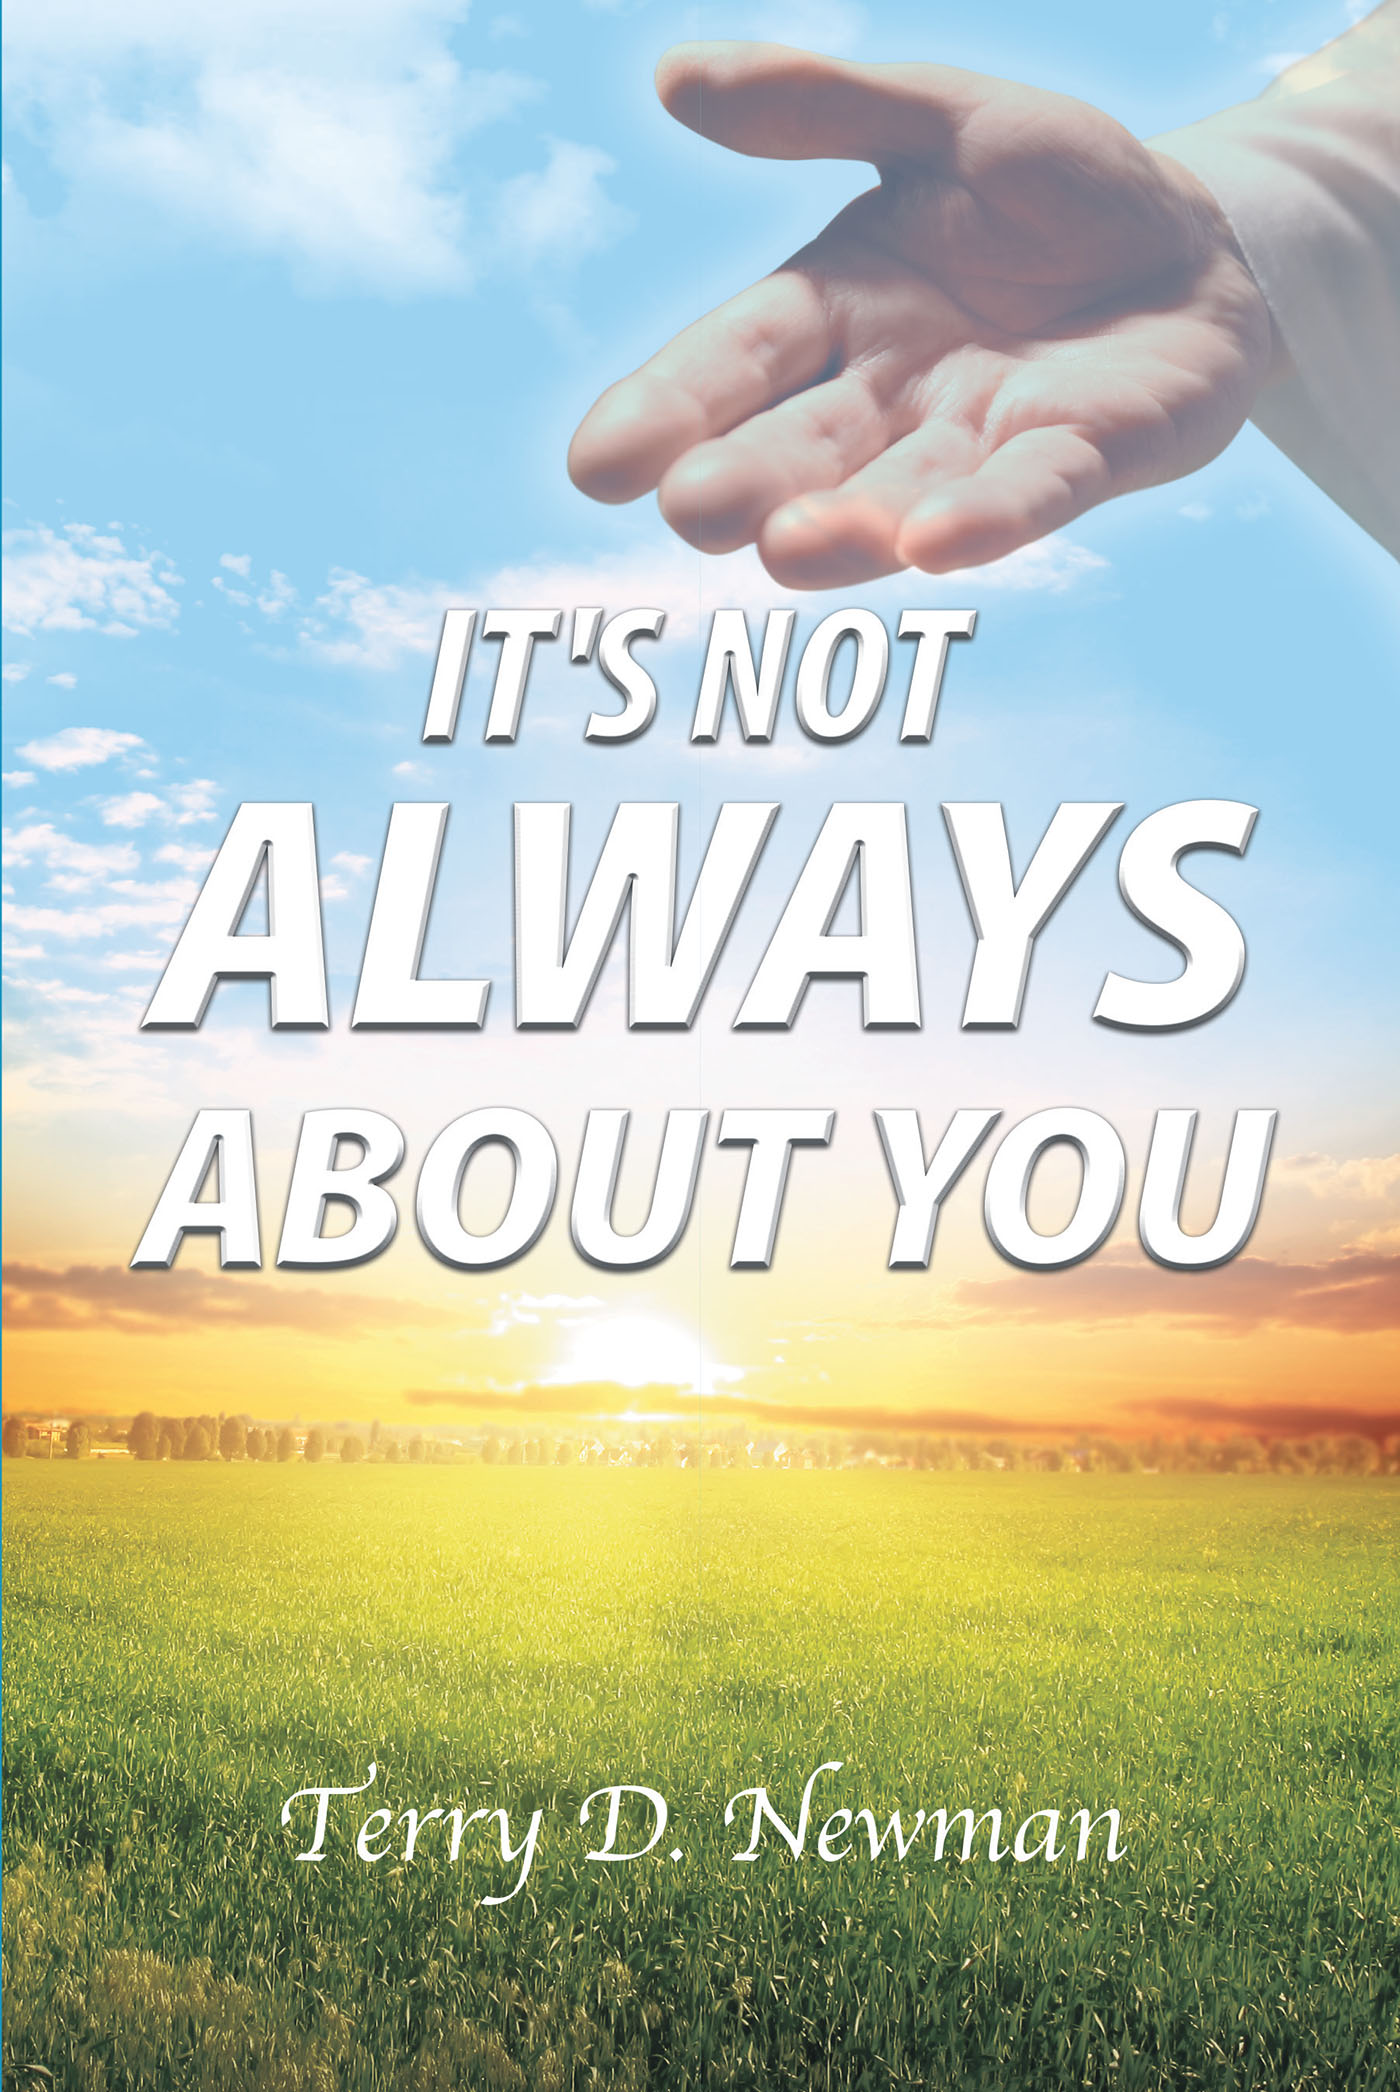 Terry D. Newman’s Newly Released "It’s Not Always About You" is a Powerful Reflection on the Ups and Downs of Over Fifty Years of Shared Love